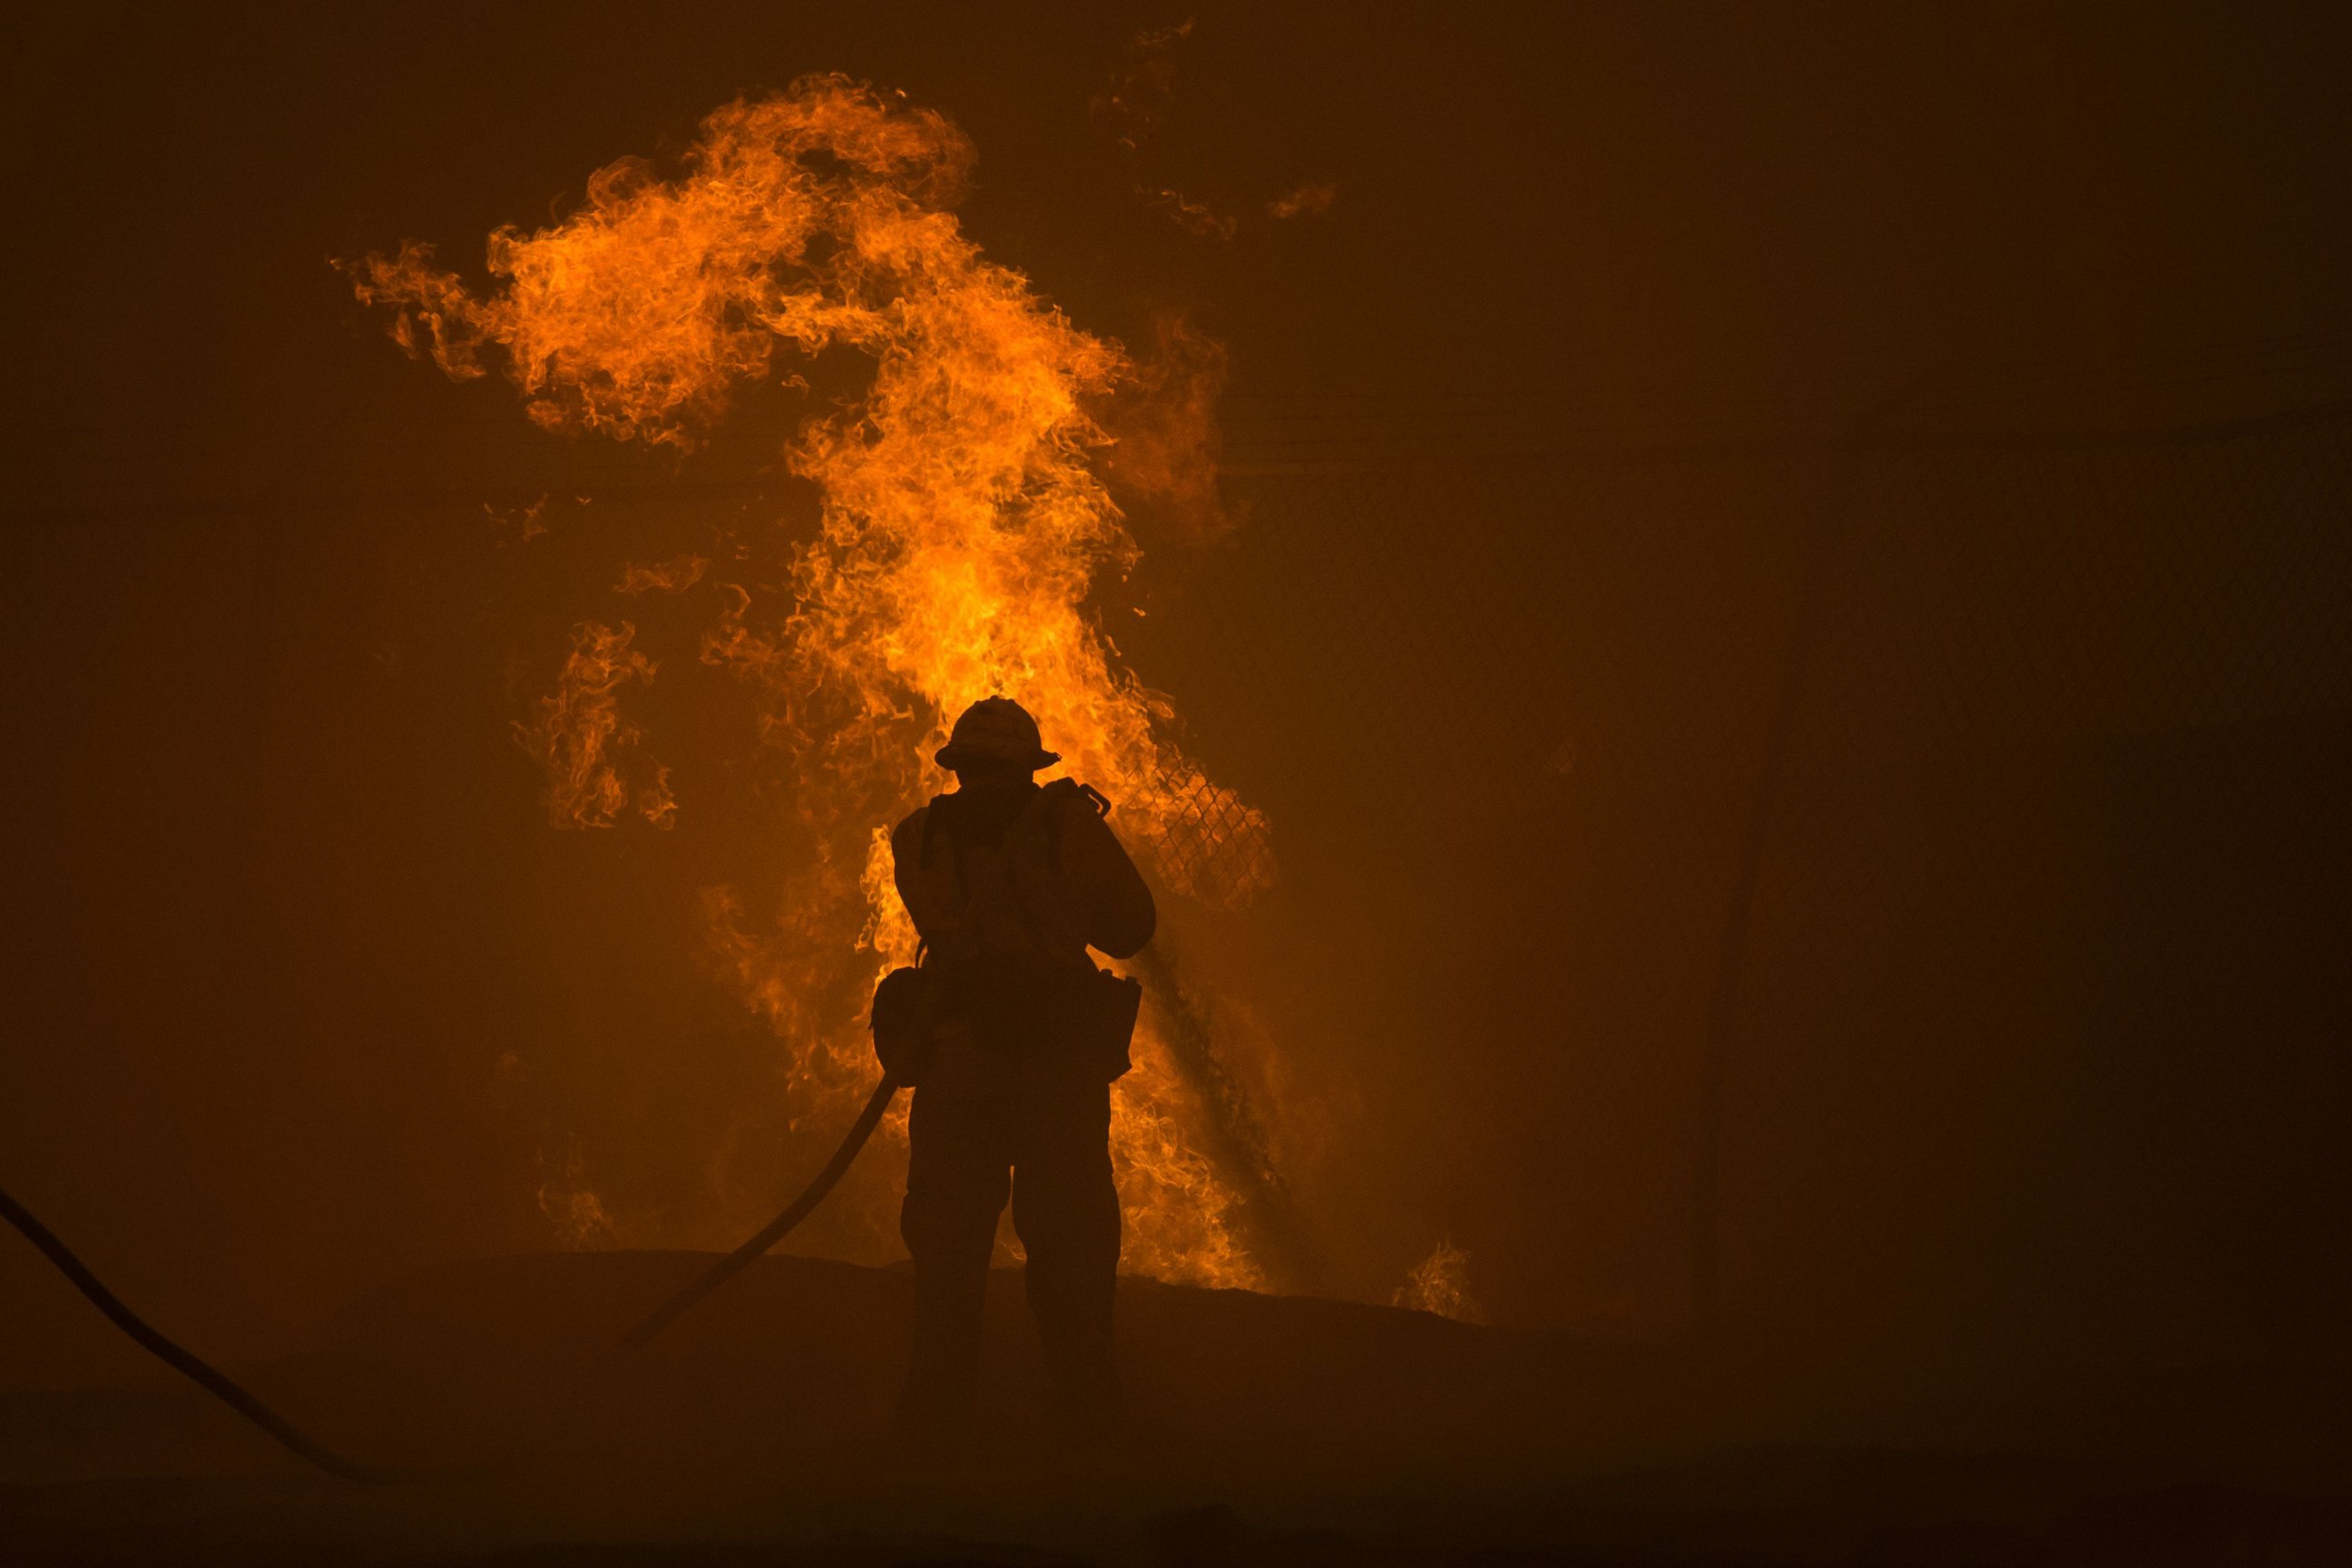 PHOTO: A firefighter hoses down burning pipes near a water tank at the Sand Fire, July 23 2016 near Santa Clarita, California.
